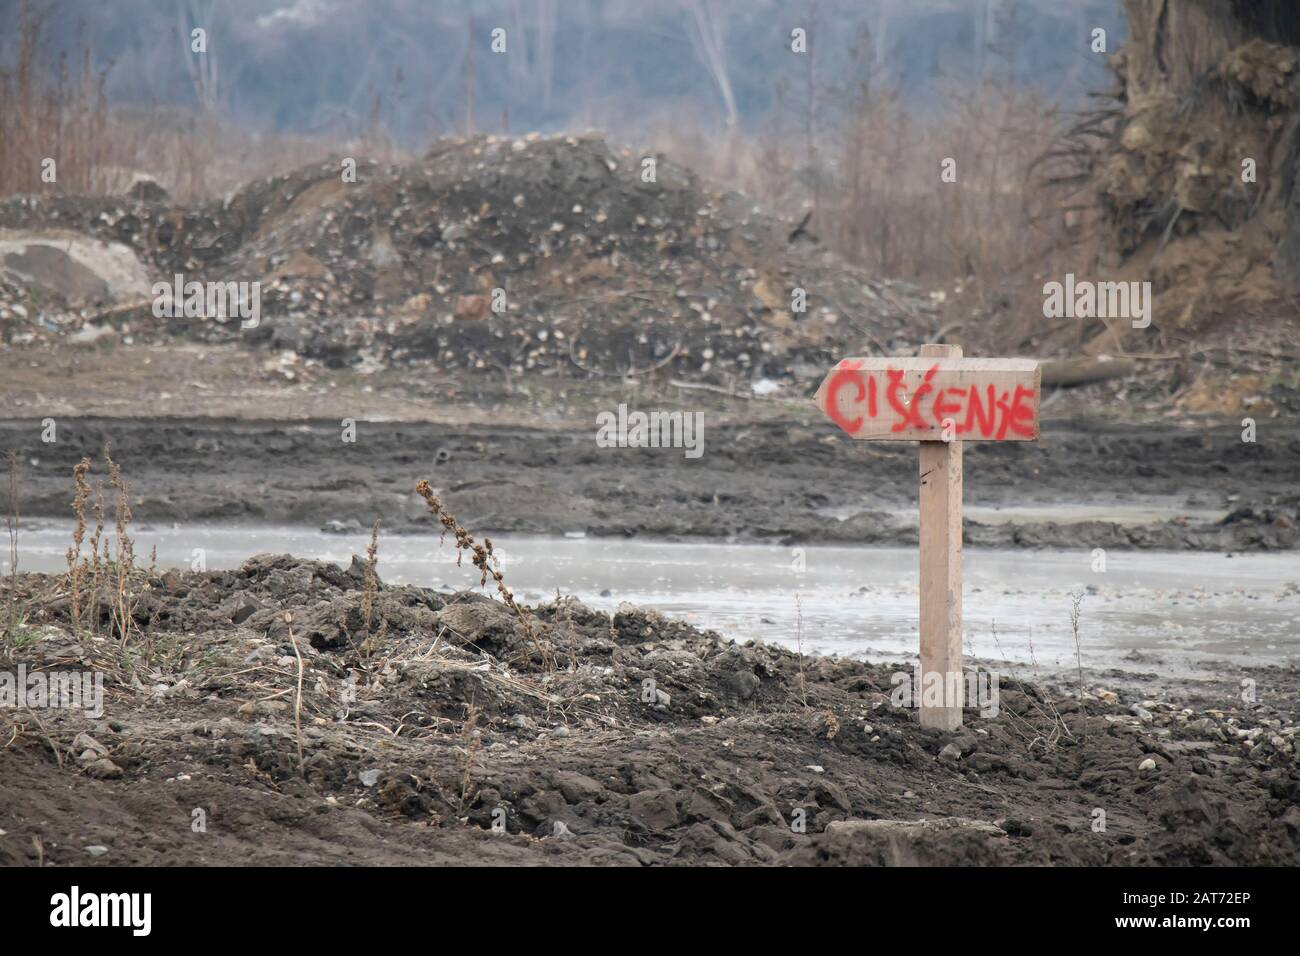 Belgrade, Serbia - January 26, 2020: Detail of a mud road on Waterfront construction site disposal area with wooden direction sign for cleaning Stock Photo